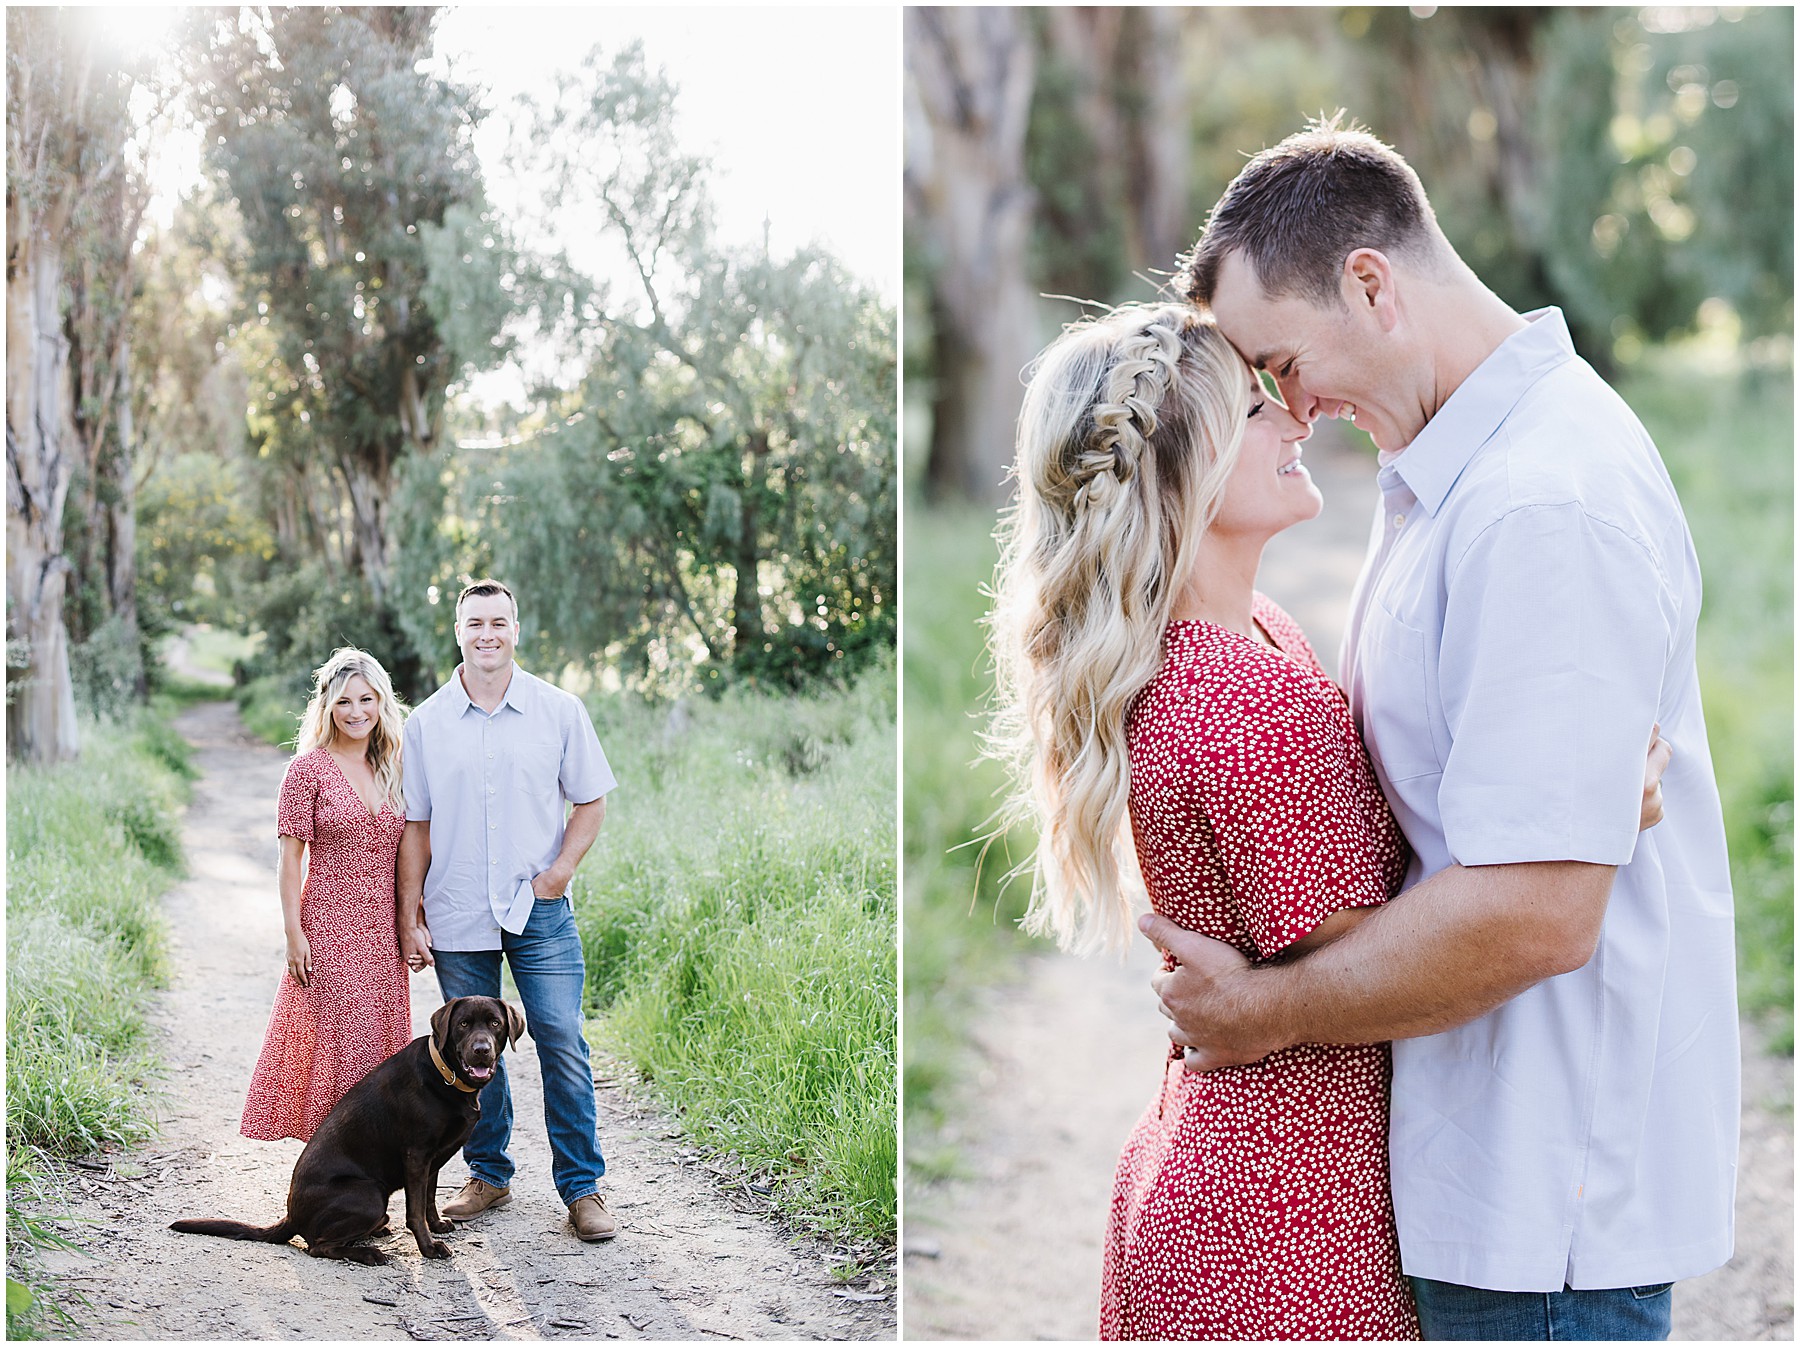 Spring Engagement Session in San Luis Obispo, California at Terrace Hill